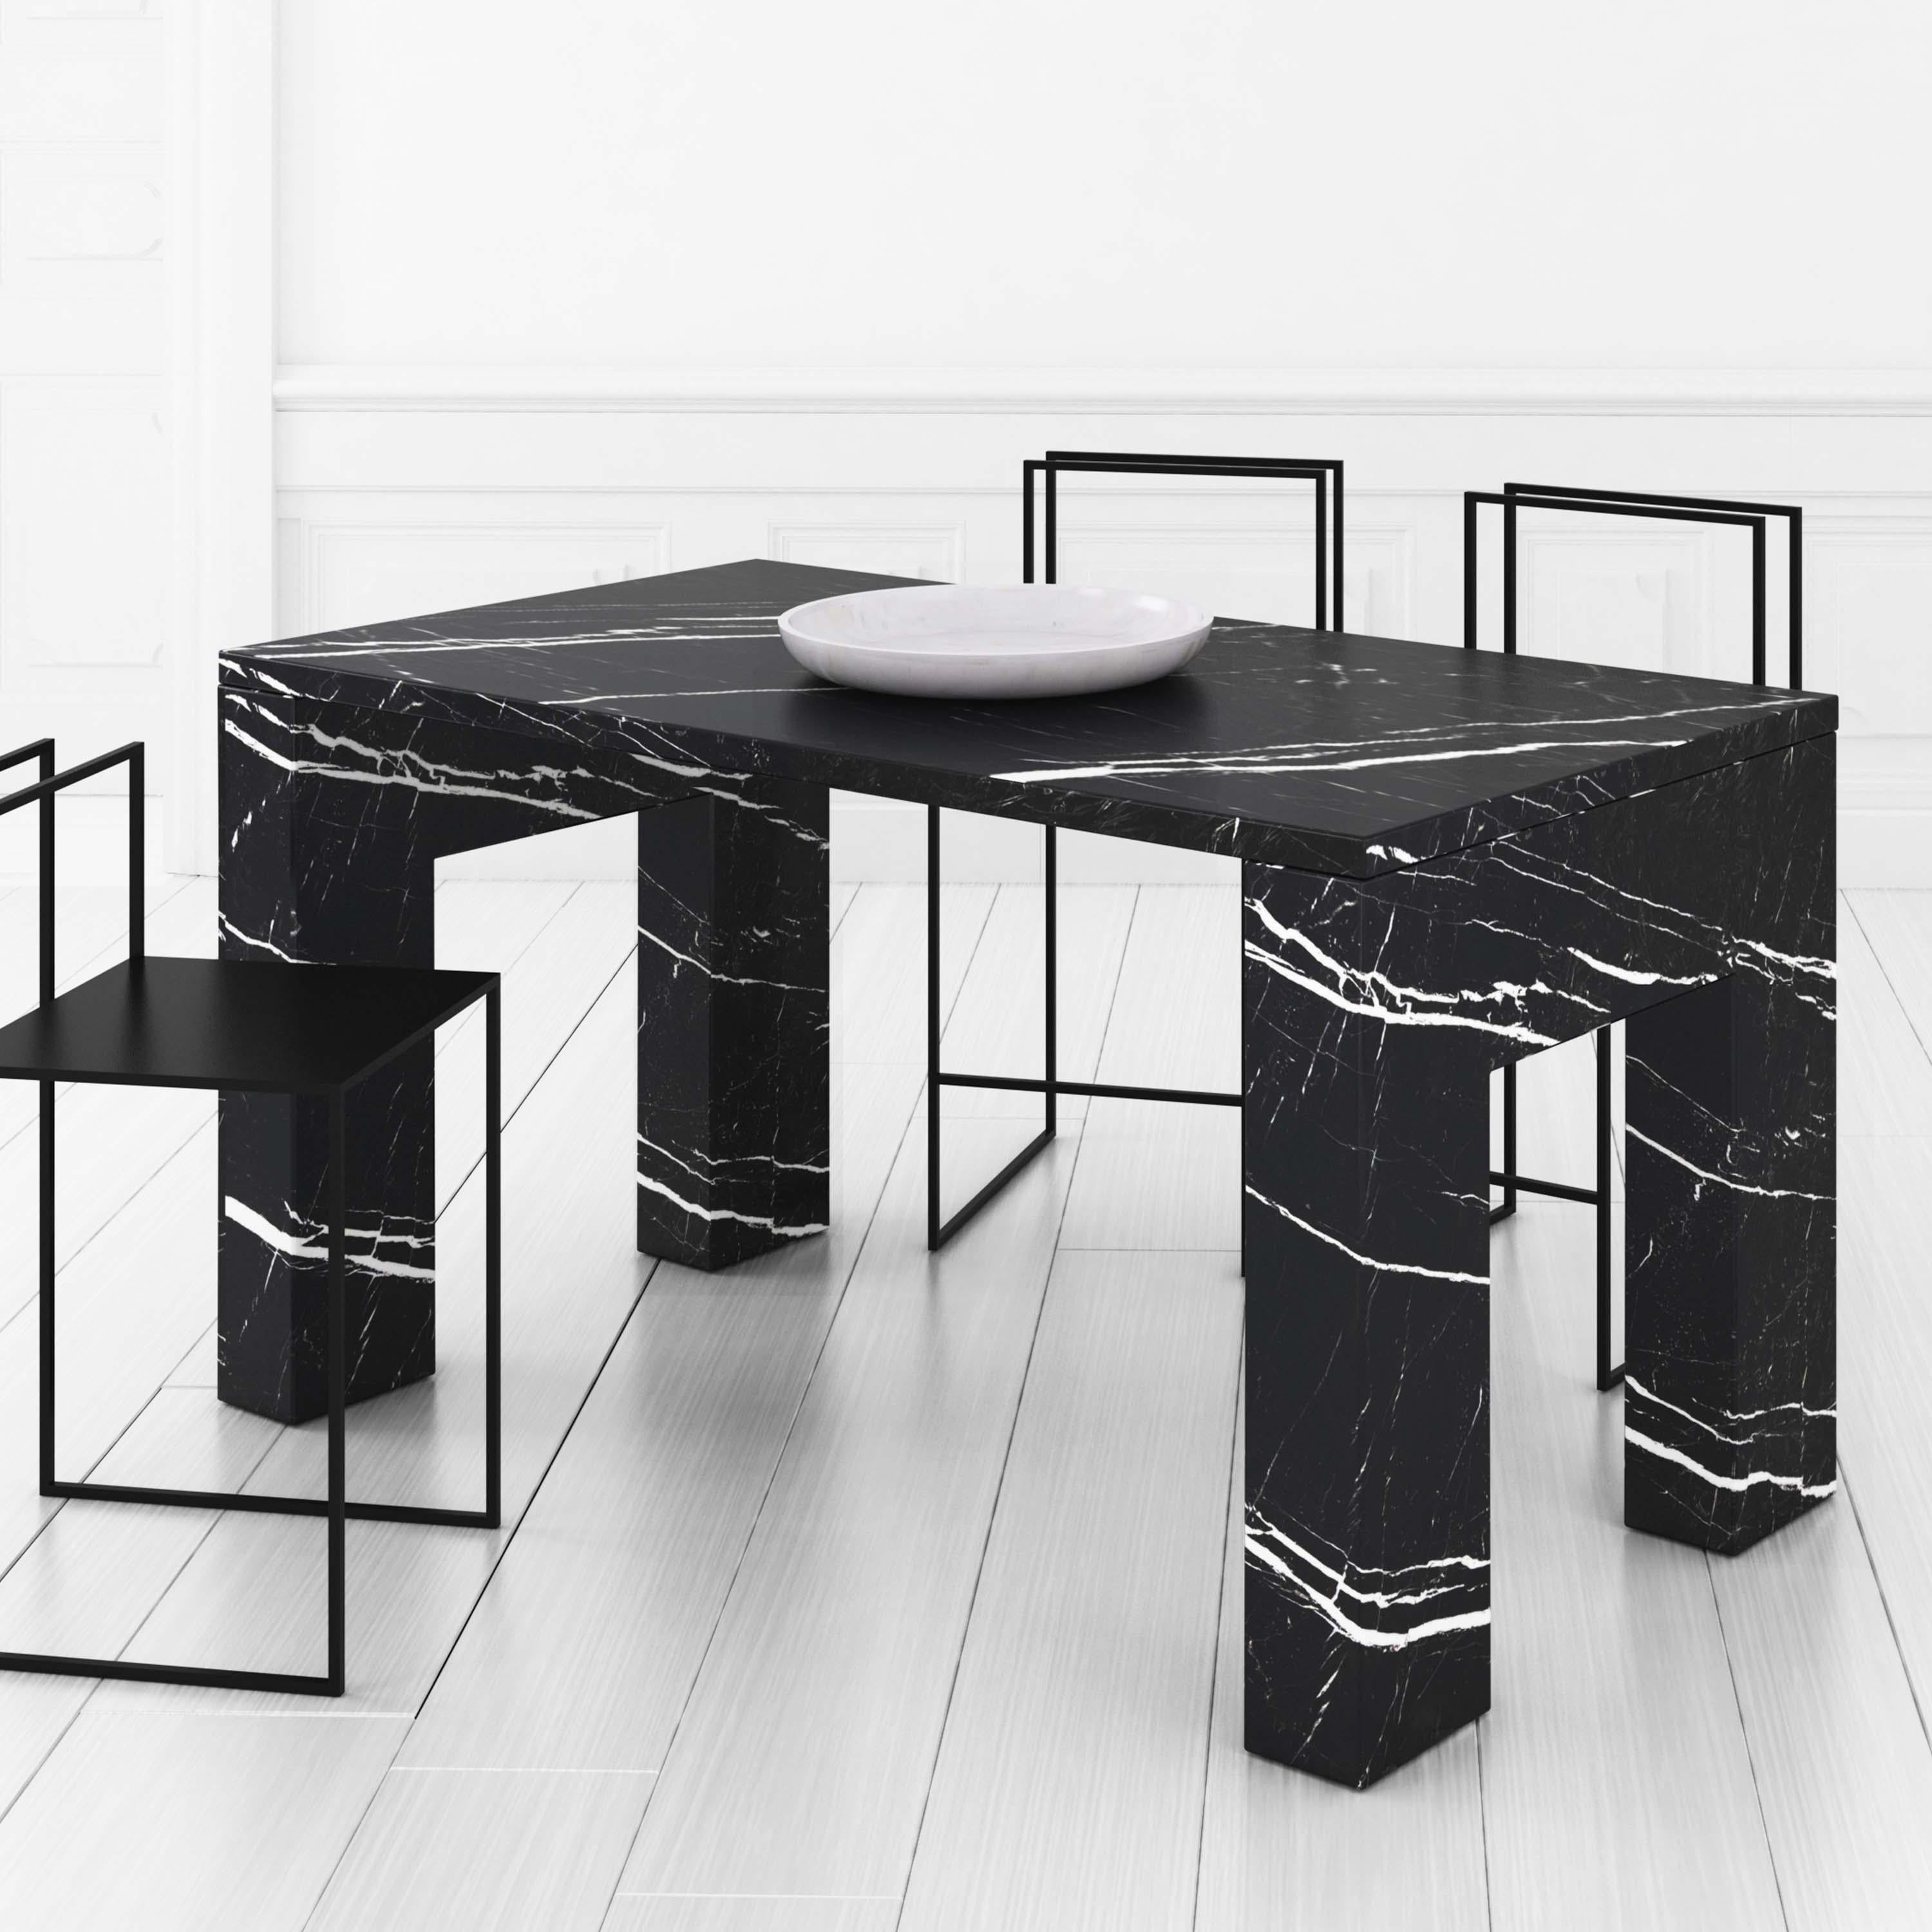 The natural stone is the star of the show in this table which were designed by Smponia Konstantina with the specific intention of highlighting the opulence of the Marquina marble. The designer chose a polish finish so as to bring an elegance touch